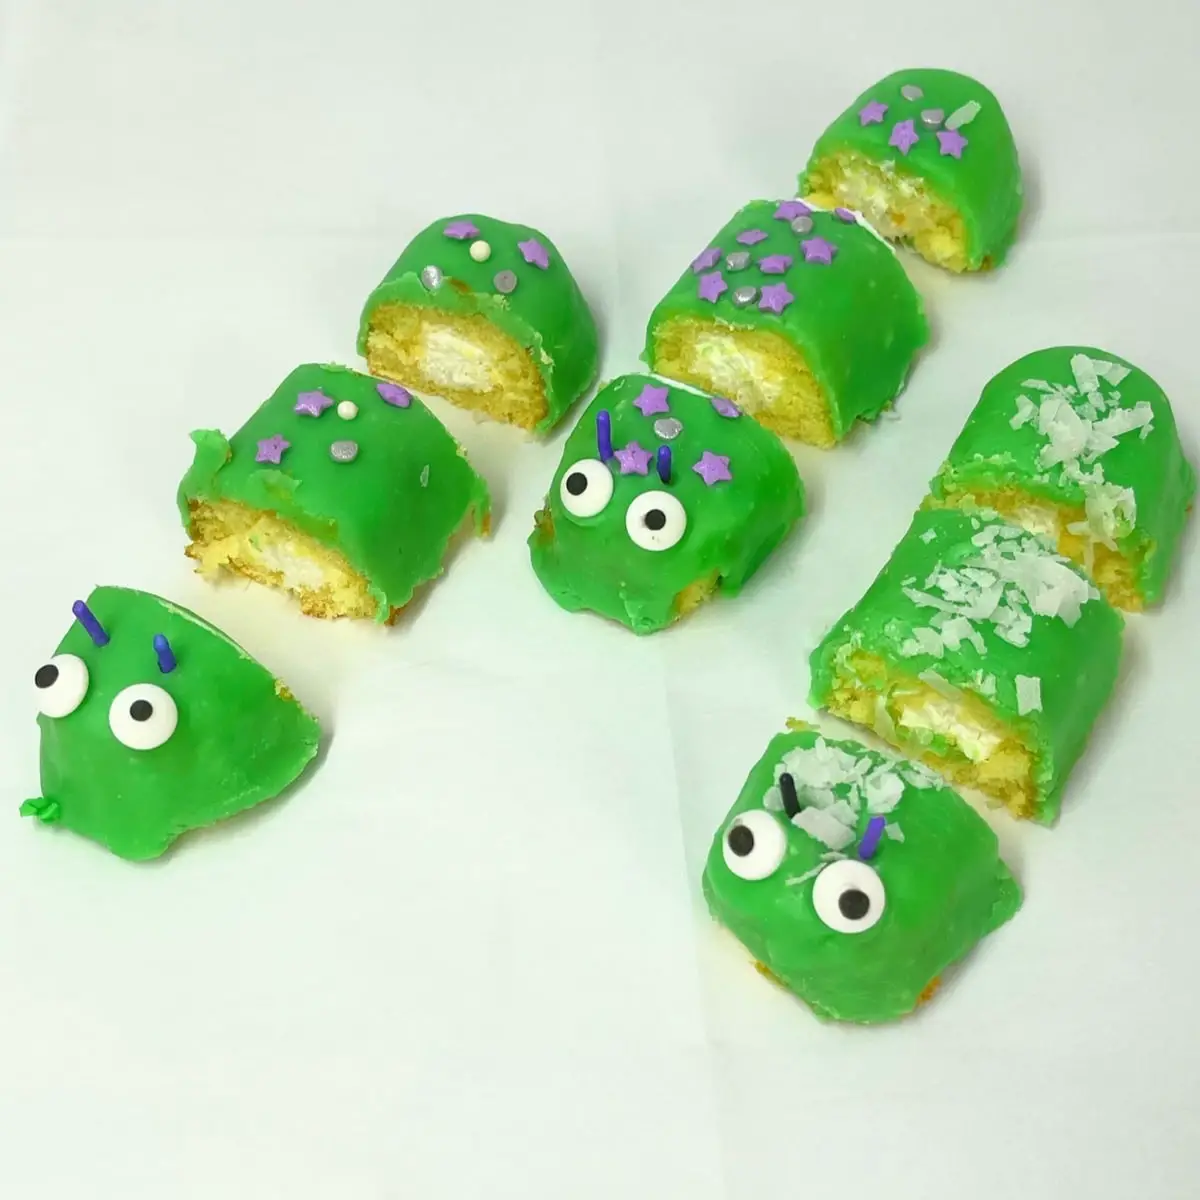 No-Bake Green Caterpillar Twinkie Dessert Recipe – Perfect for St. Patrick’s Day or Birthday Party